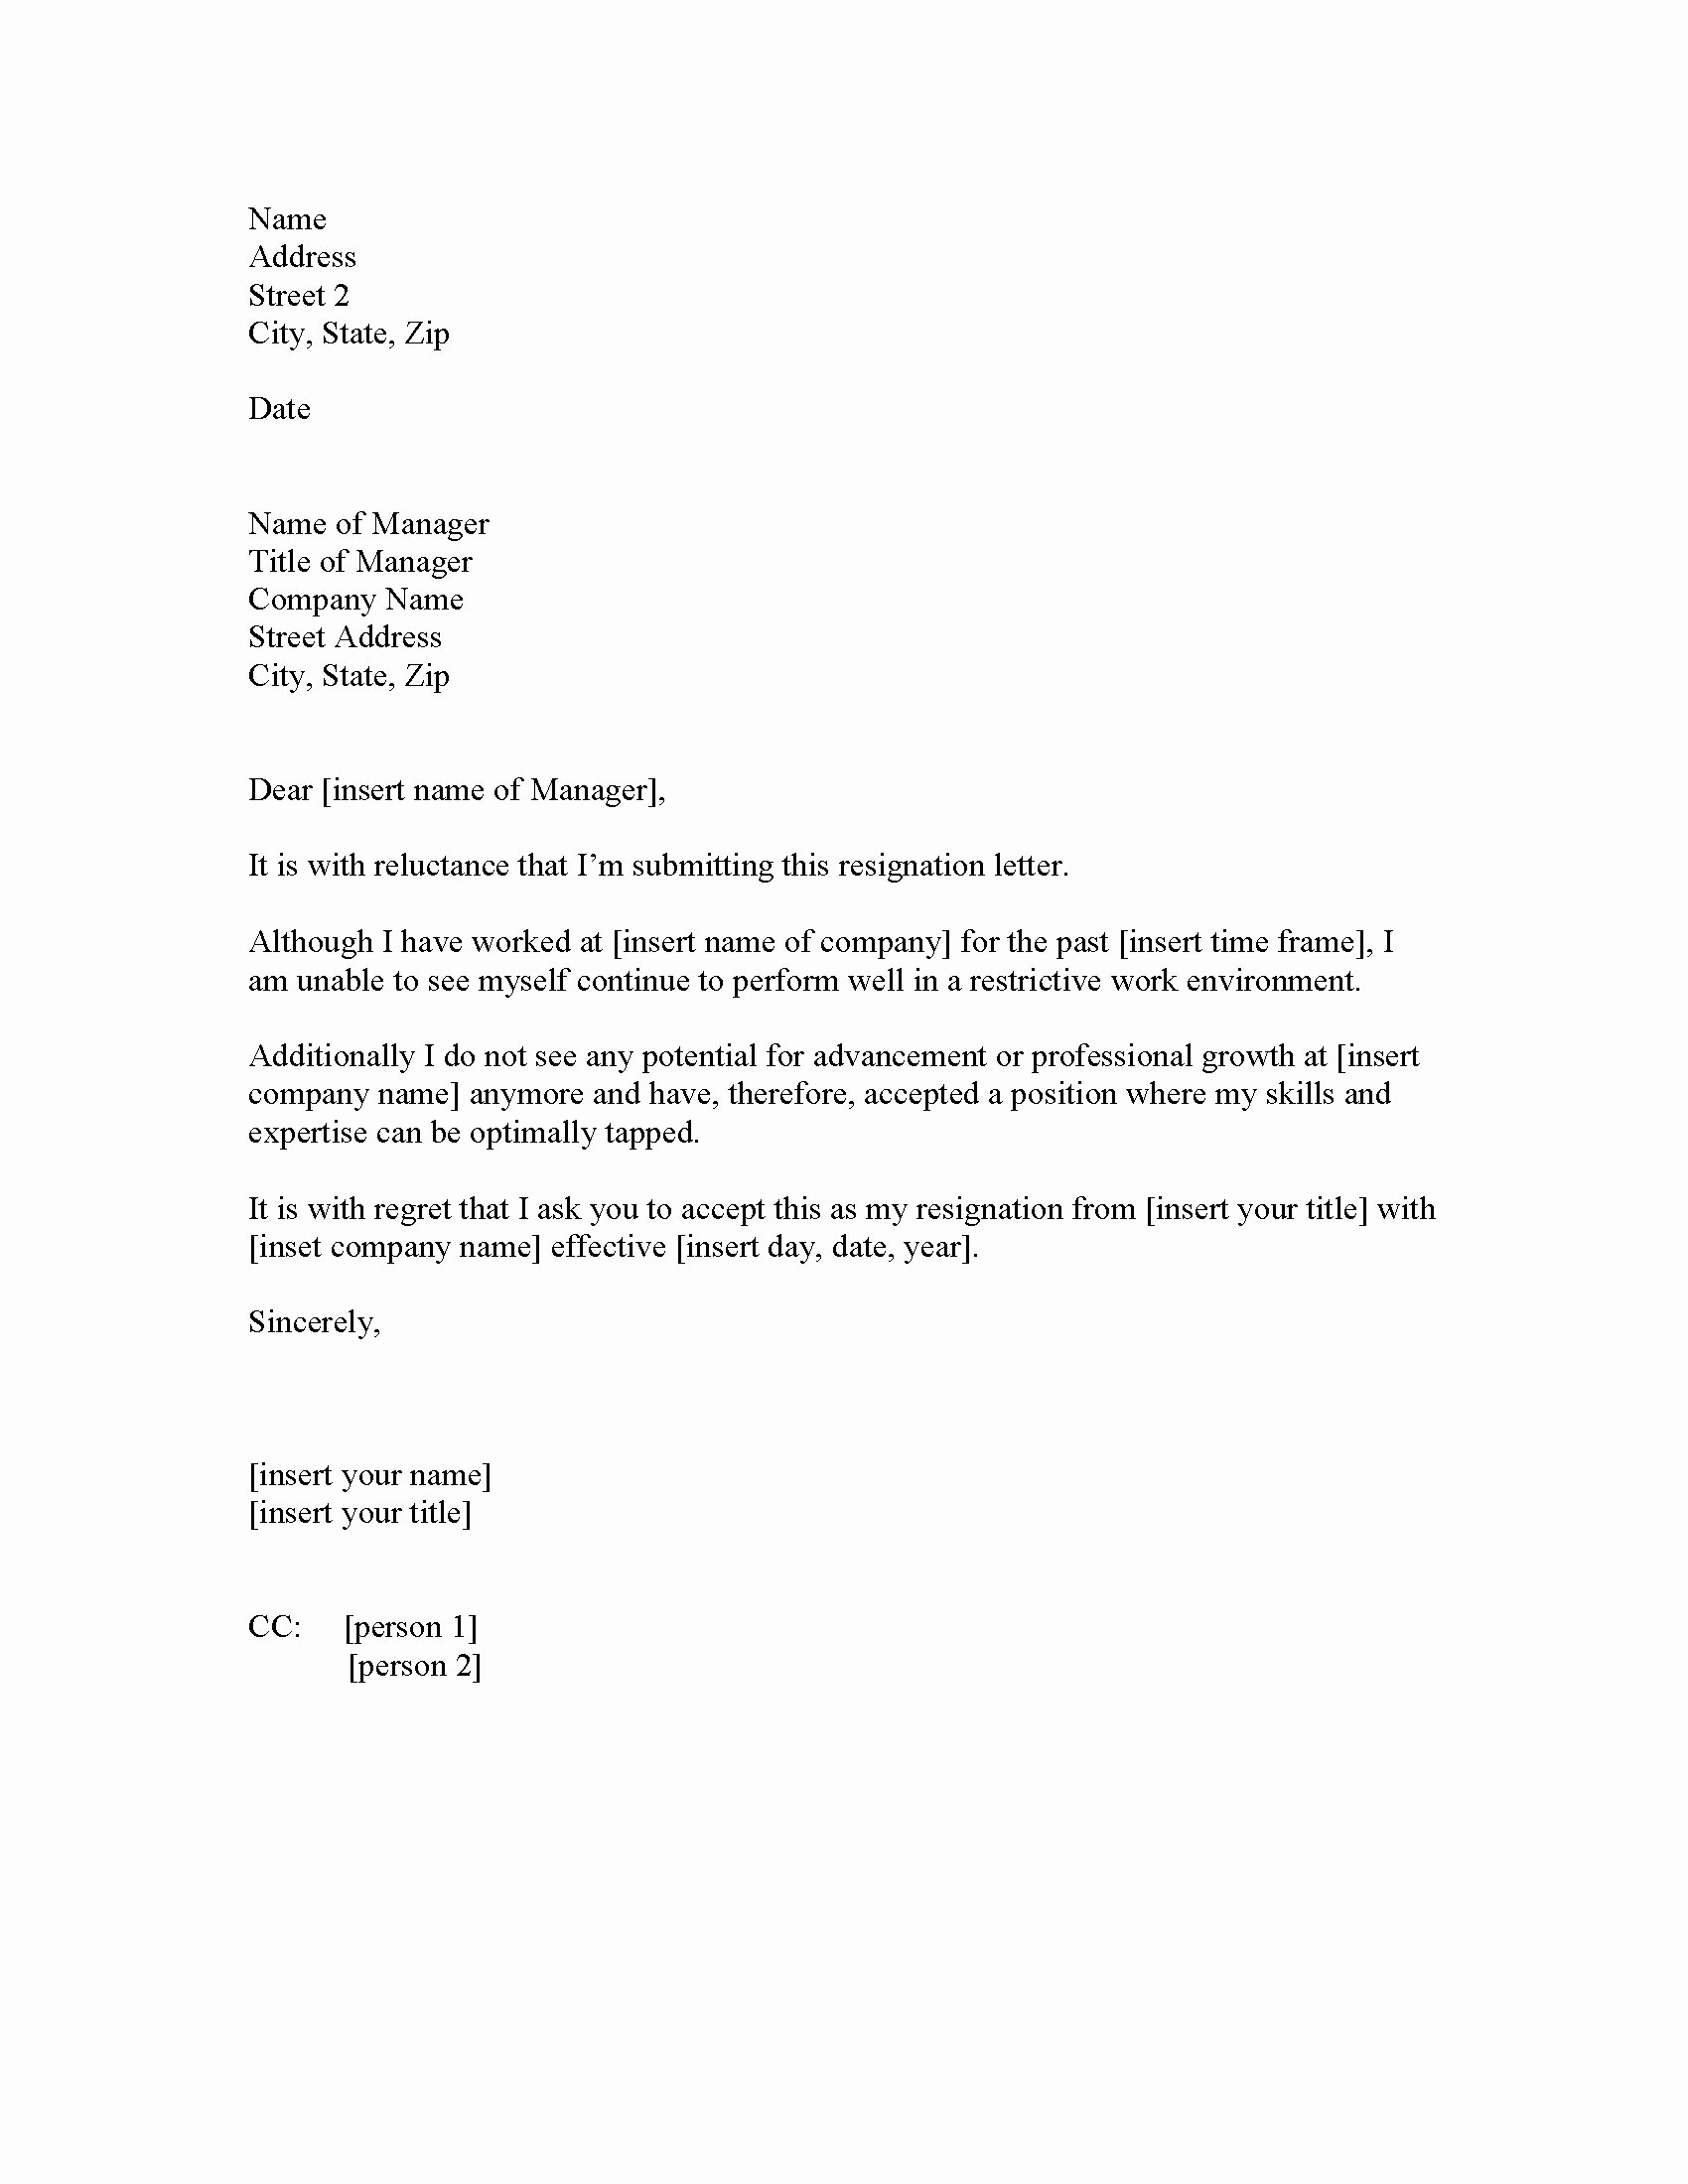 Resign Letter Sample Luxury Dos and Don Ts for A Resignation Letter